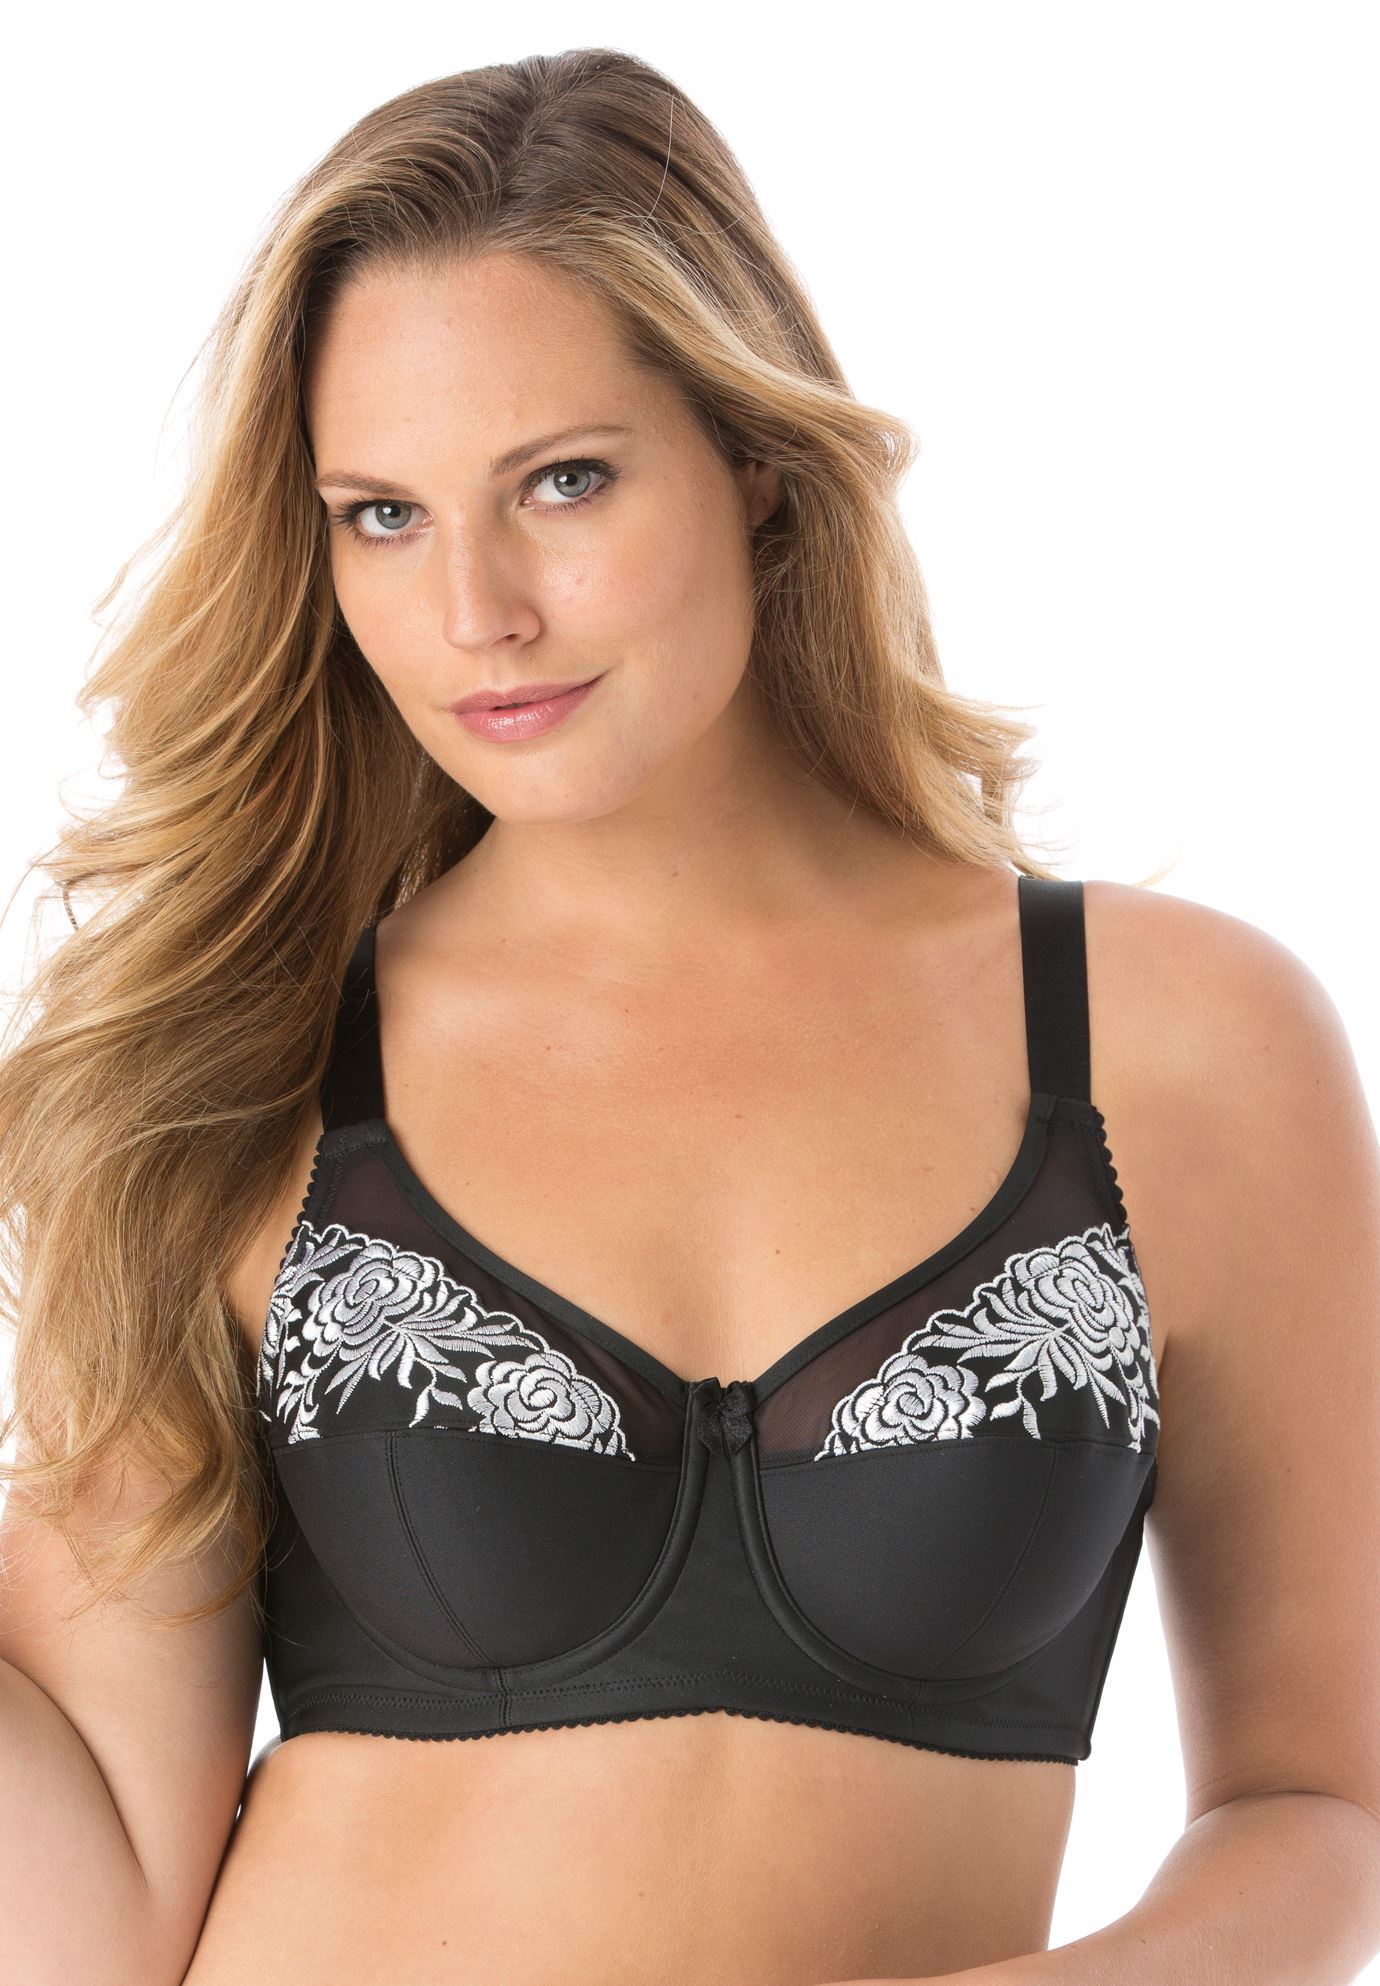 Embroidered Underwire Bra By Elila® Plus Size Underwire Bras Full Beauty 